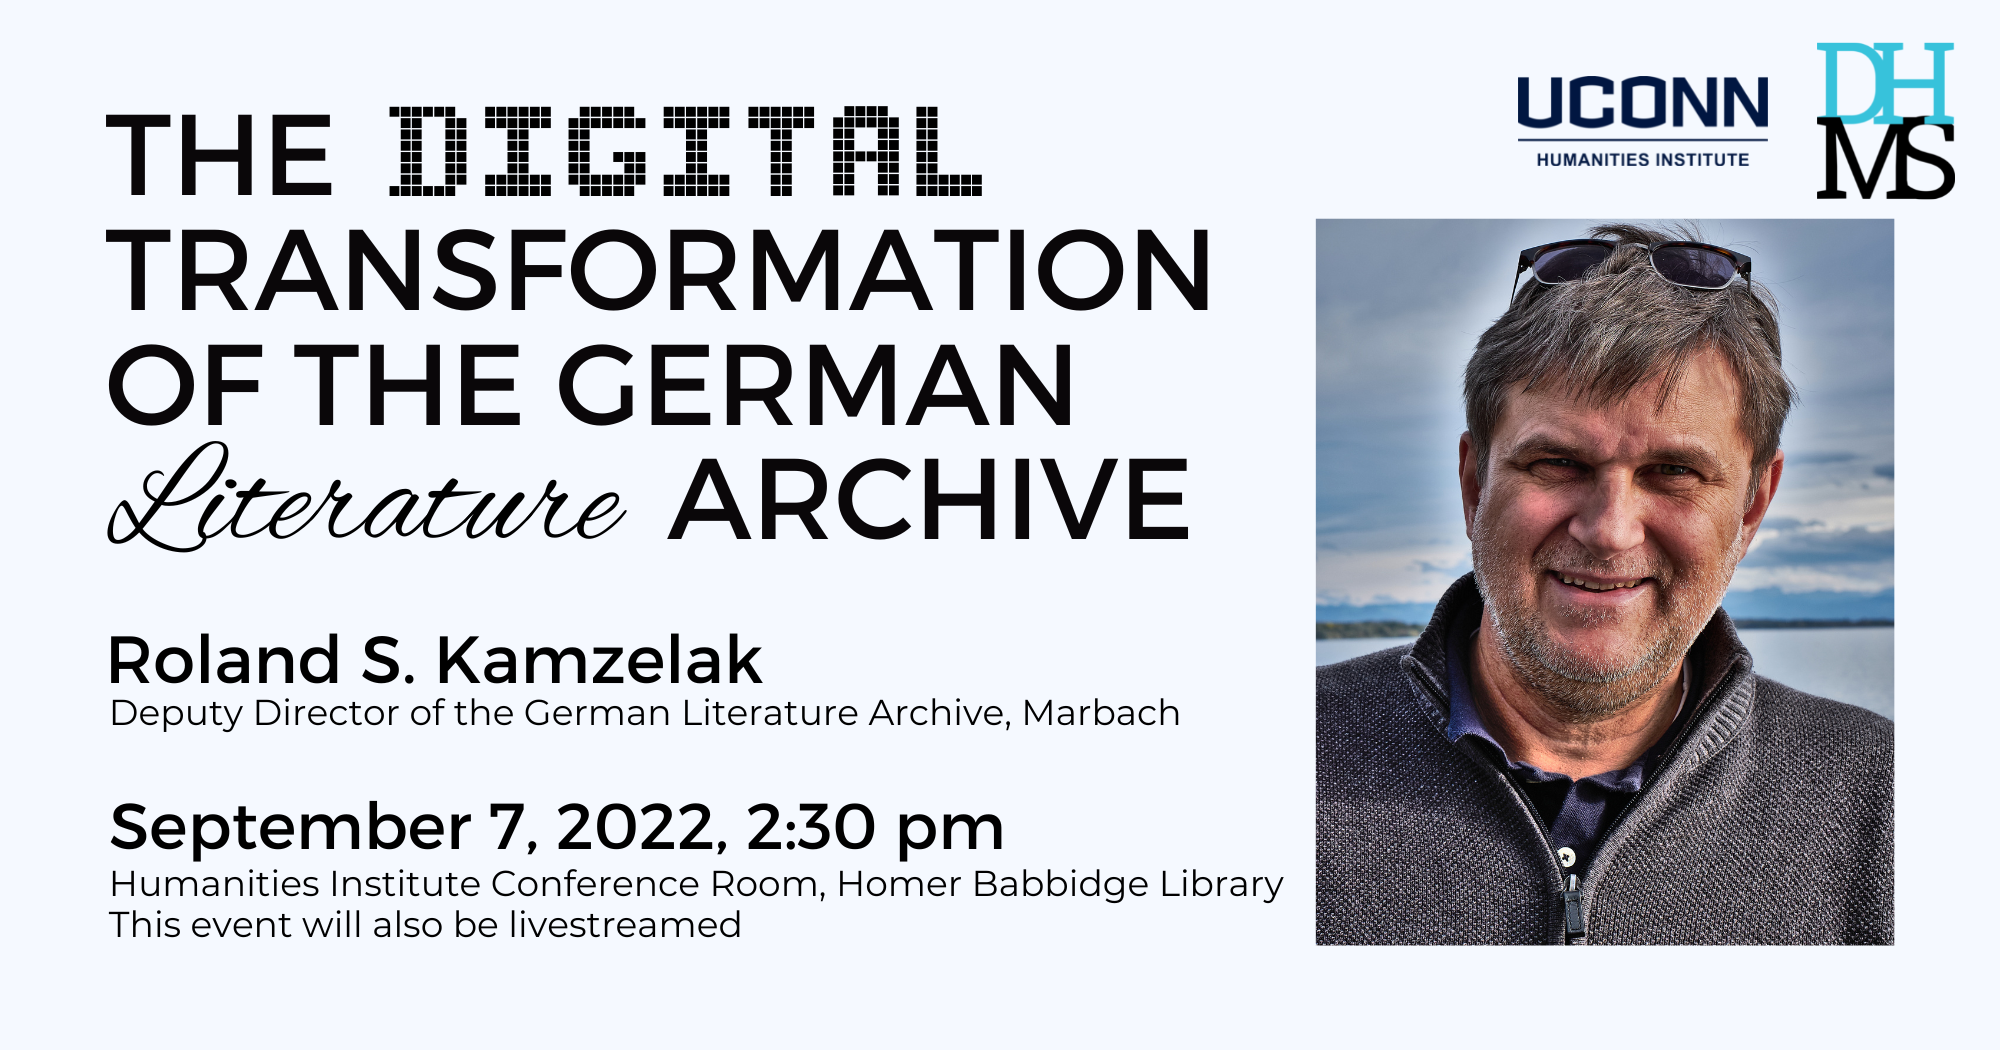 The Digital Transformation of the German Literature Archive. Roland S Kamzelak, Deputy Director of the German Literature Archive, Marbach. September 7, 2022, 2:30 pm. Humanities Institute Conference Room, Homer Babbidge Library. This event will also be livestreamed.